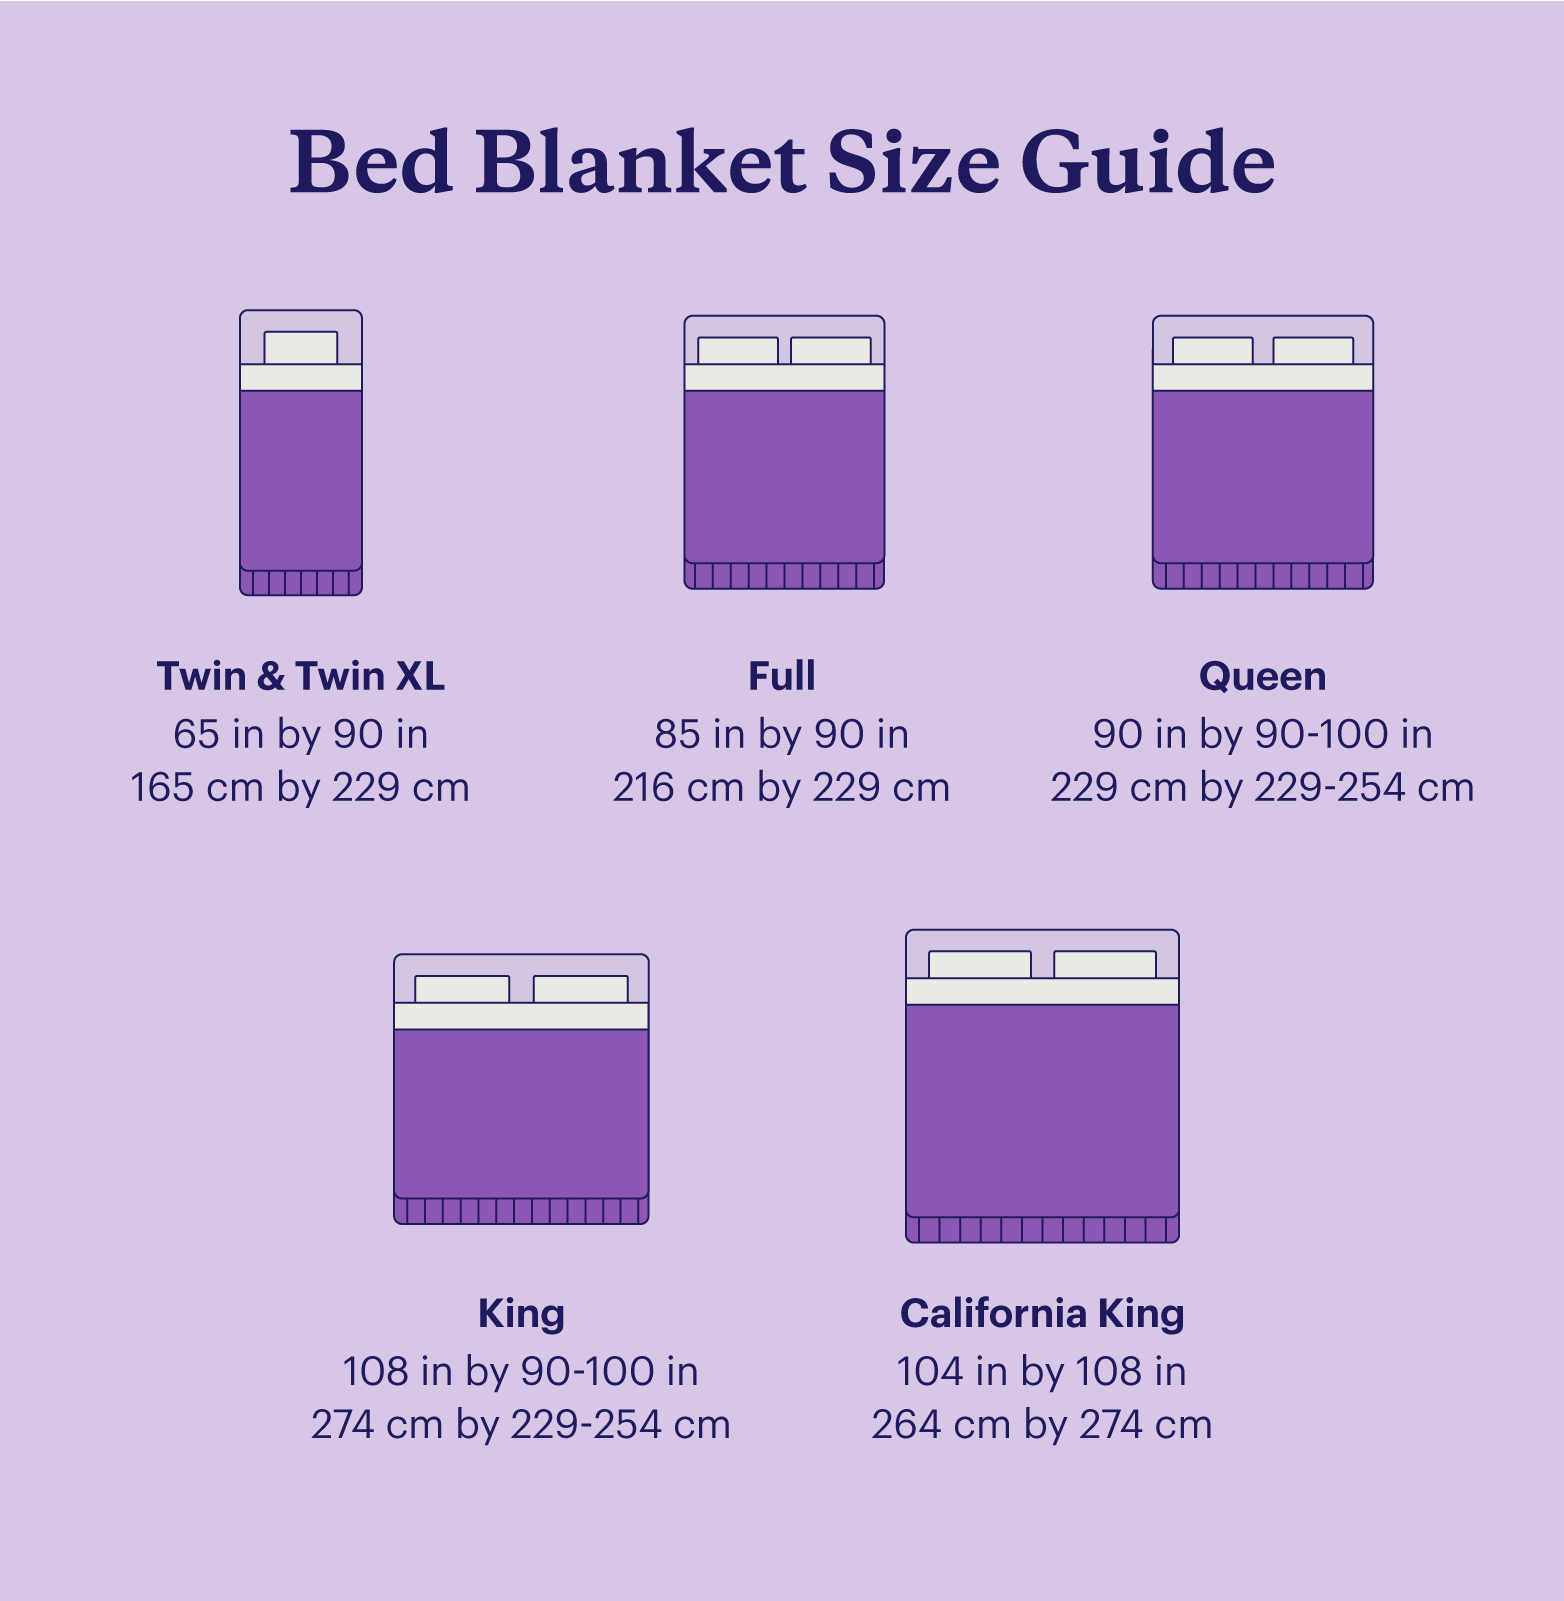 How to Size Blankets for Your Bed  Mattress sizes, Standard mattress sizes,  Mattress size chart